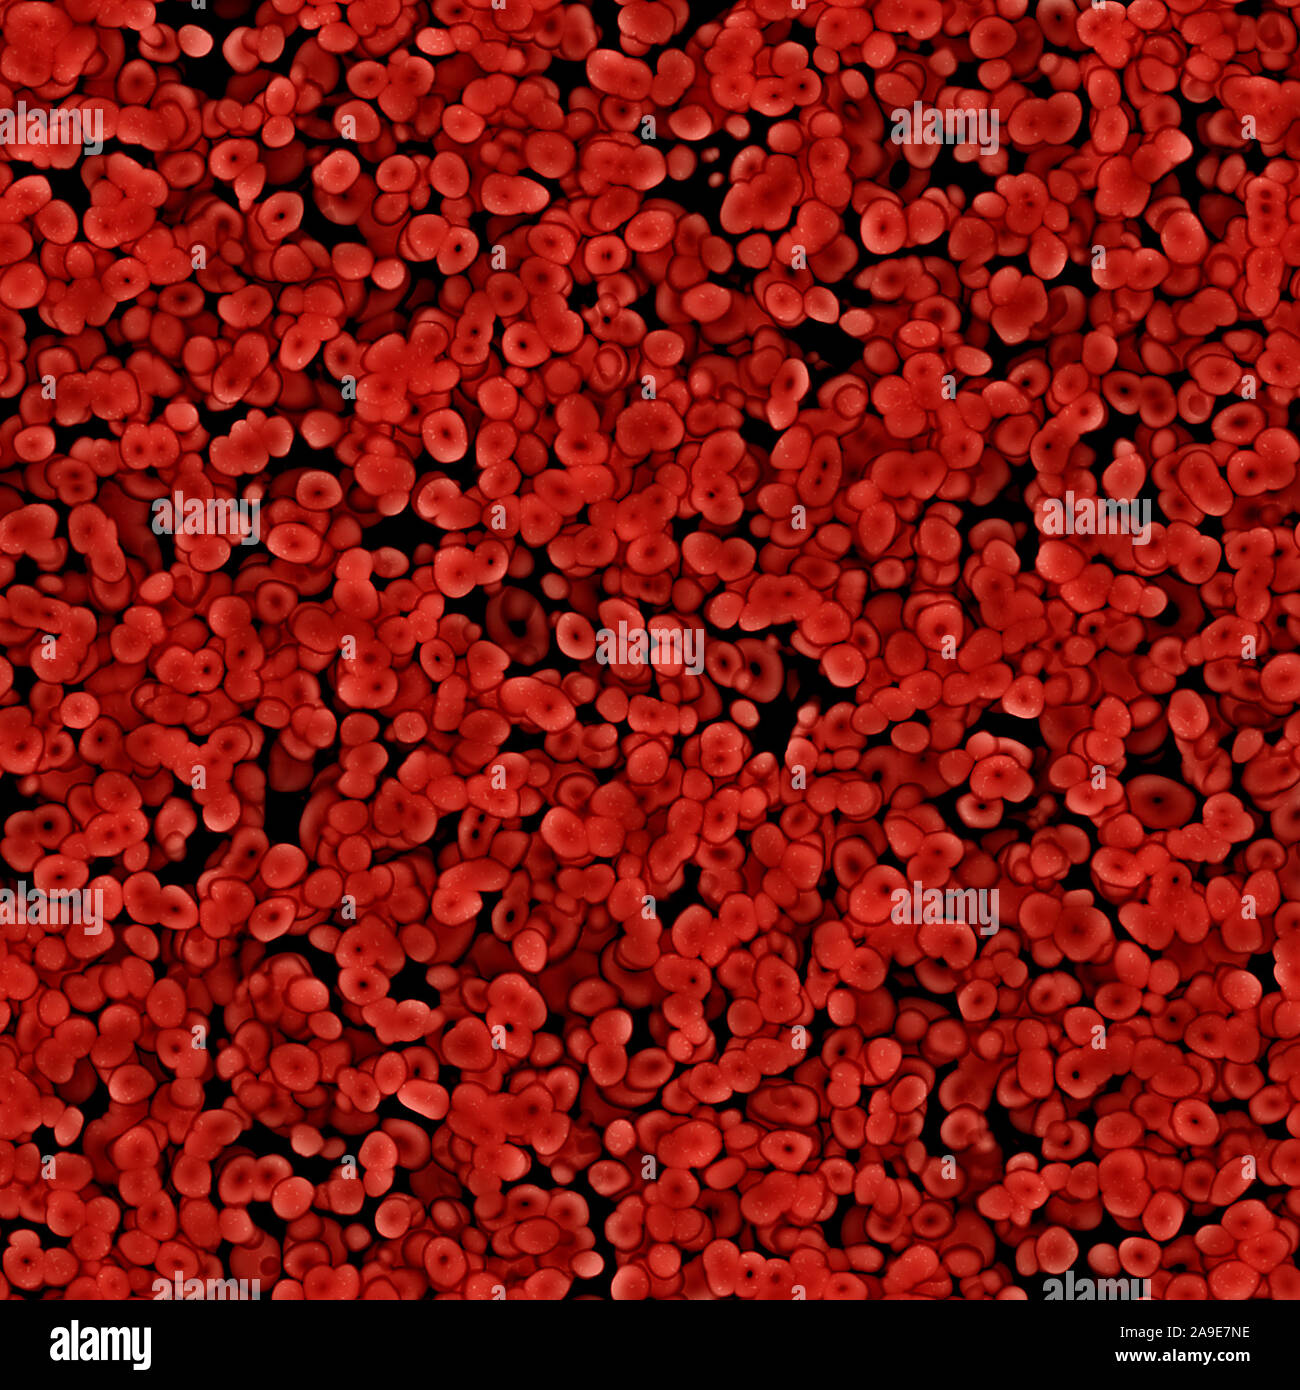 An image of a red blood texture background Stock Photo